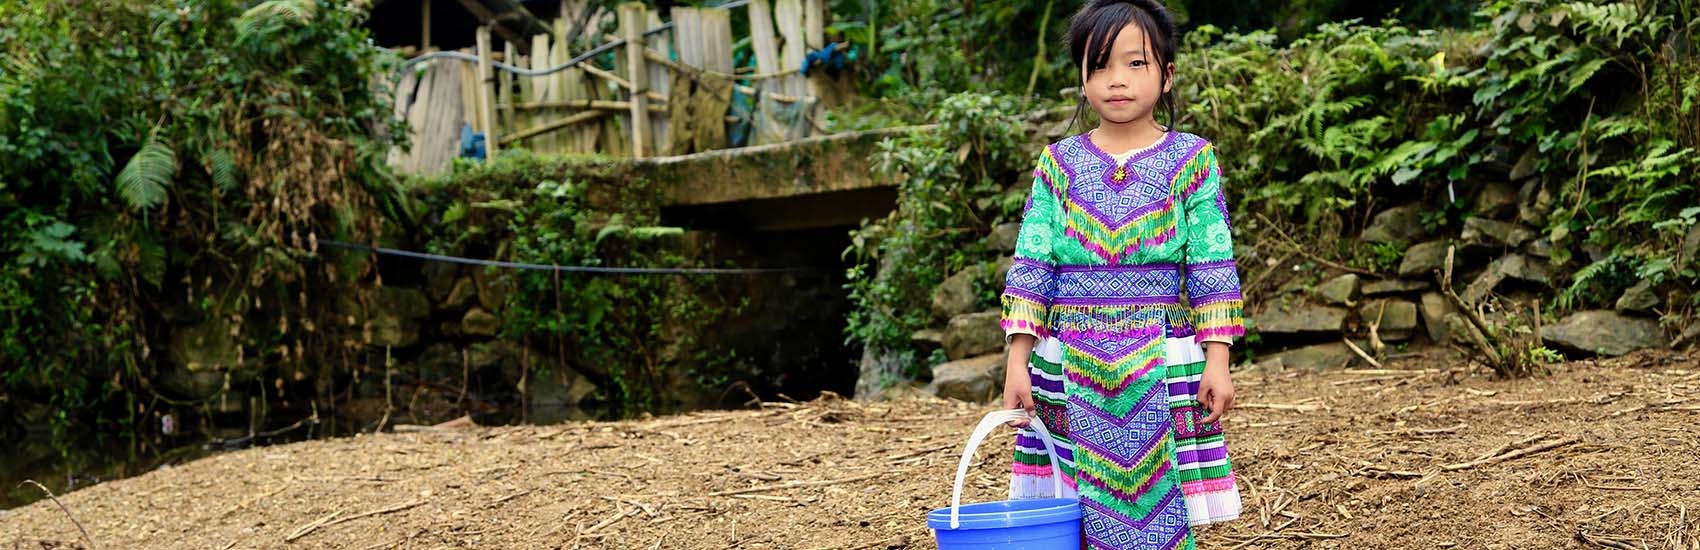 In Vietnam, a girl stands near a river and holds a water bucket. 